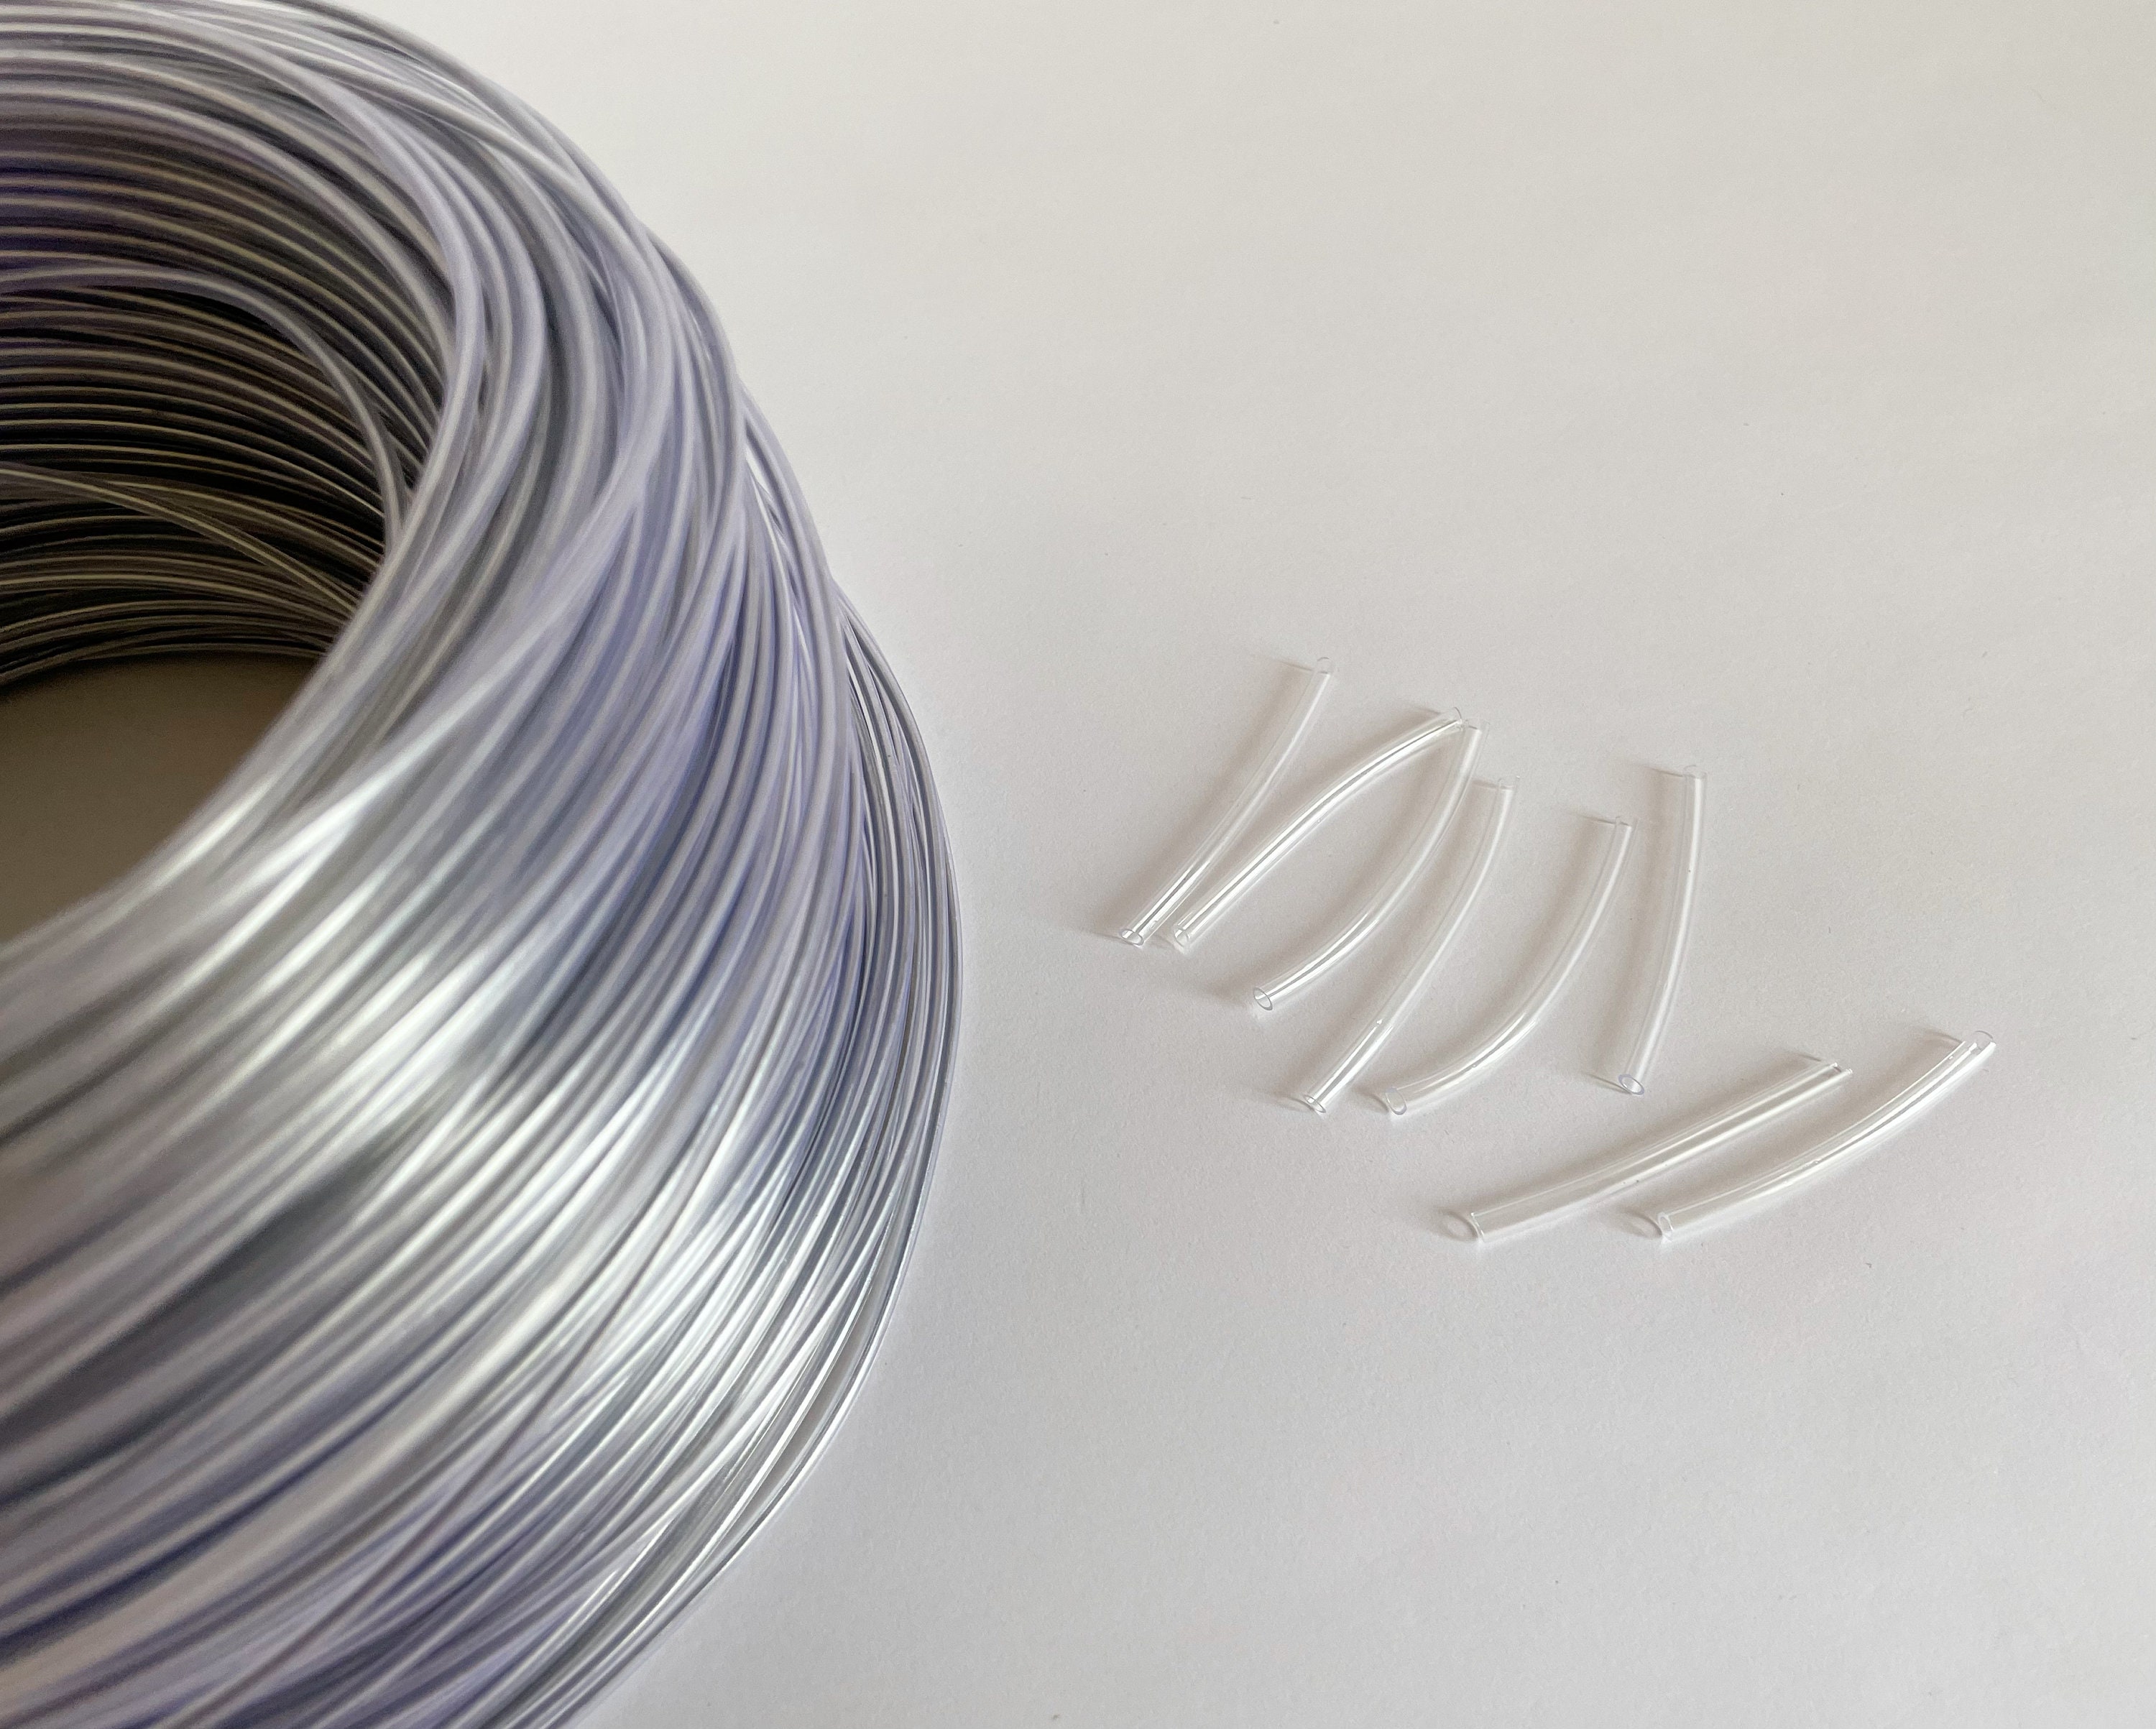 18 Gauge Aluminum Craft Wire,165 Feet 1mm Bendable Metal Wire for Jewelry  Making